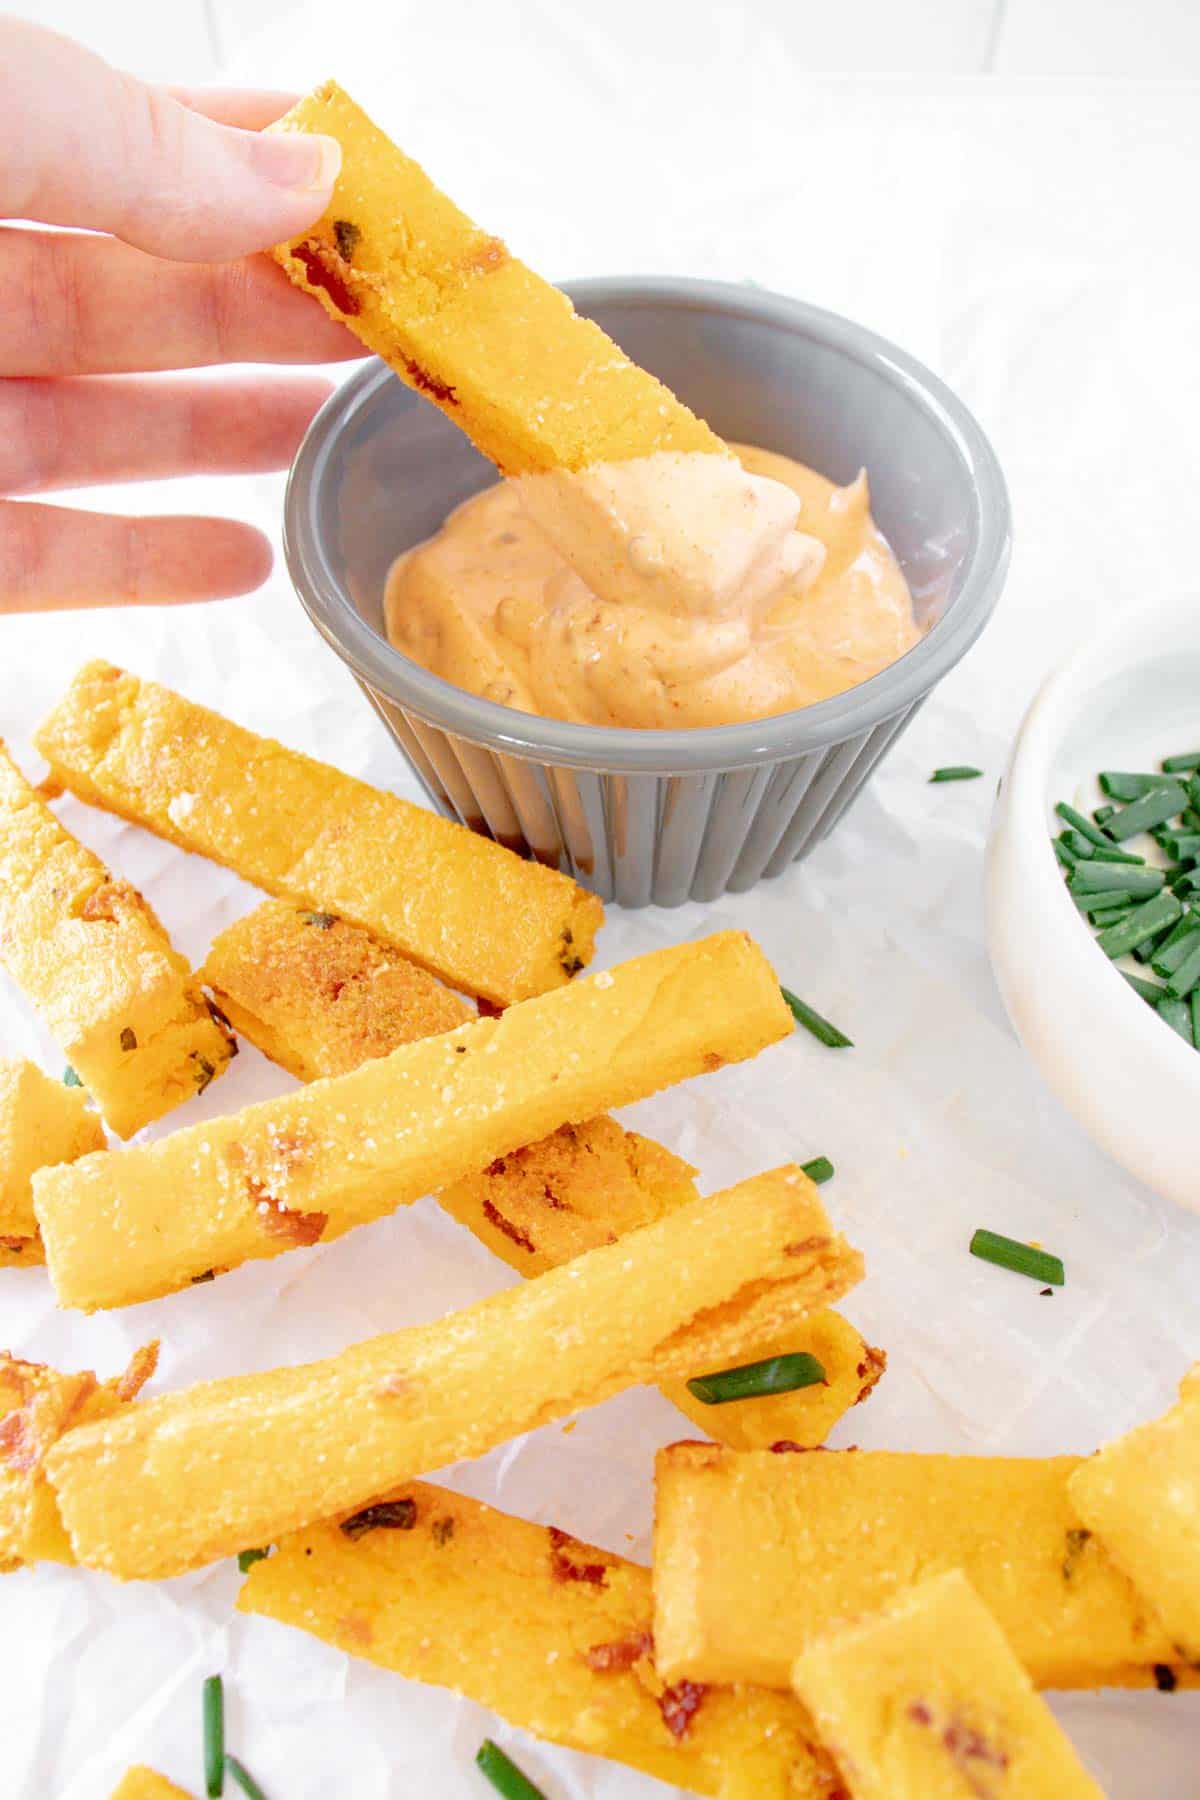 a pile of baked polenta fries and a hand dipping one into a bowl of aioli